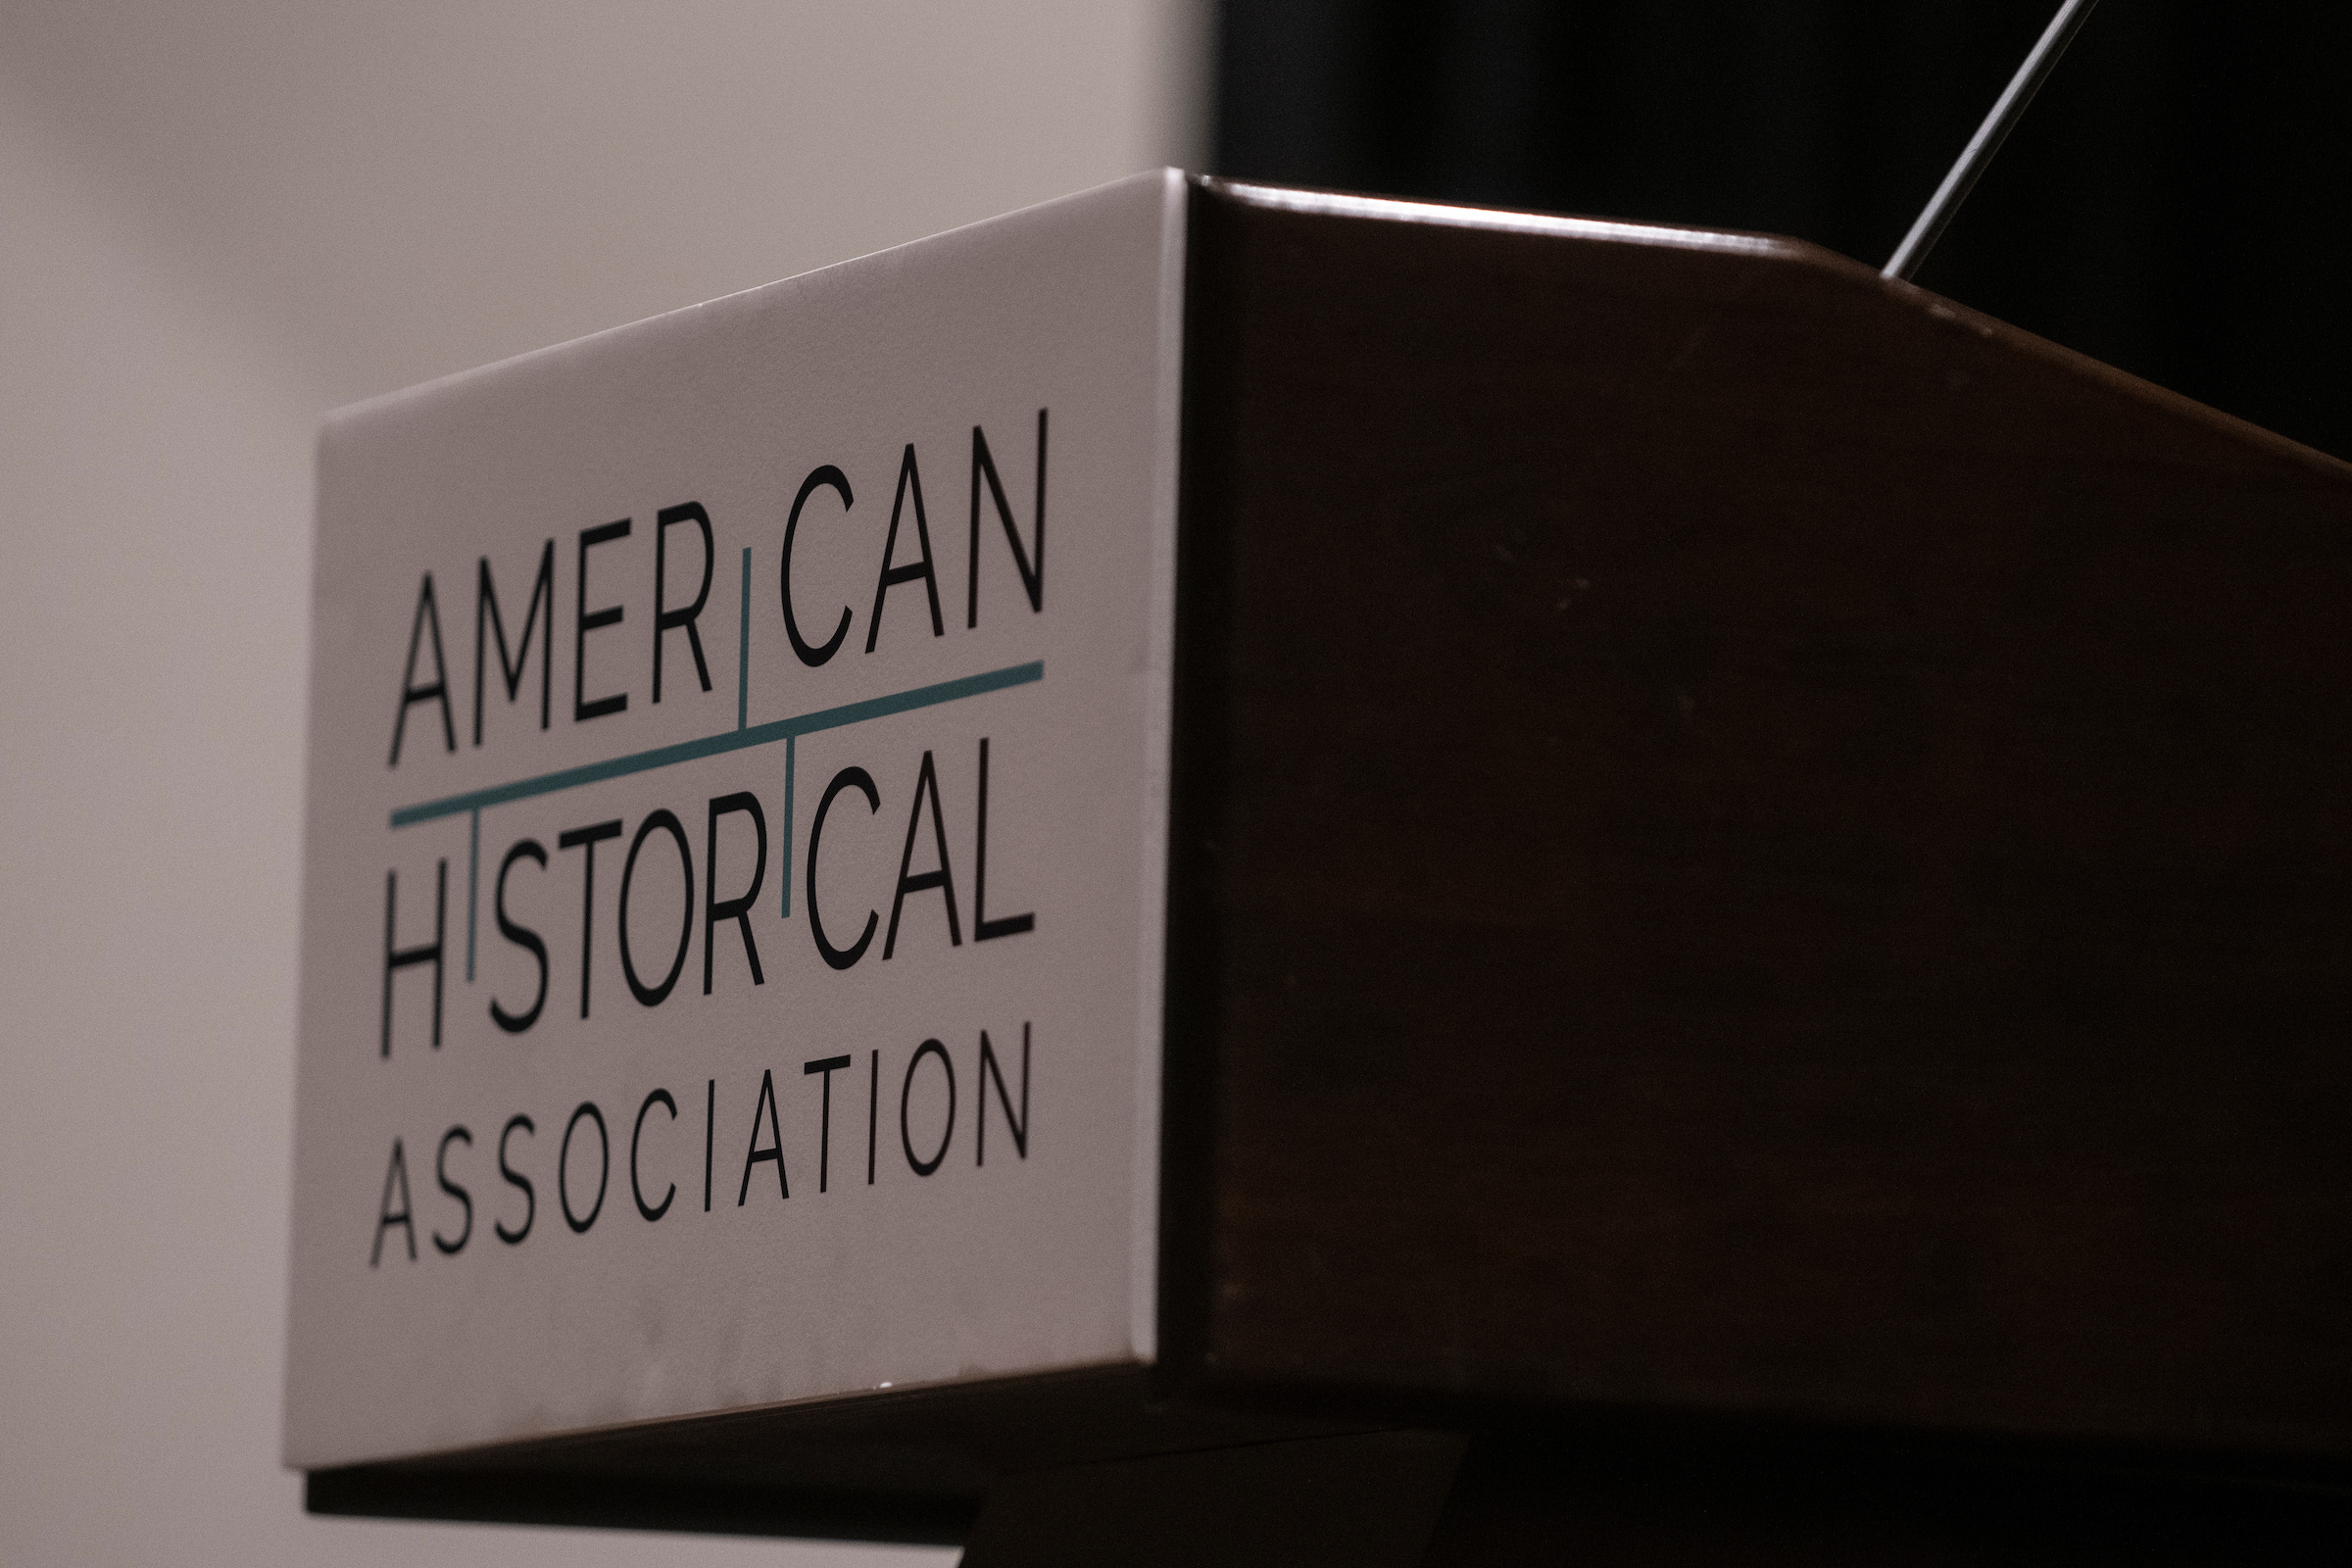 A wooden lectern with the American Historical Association logo on the front.